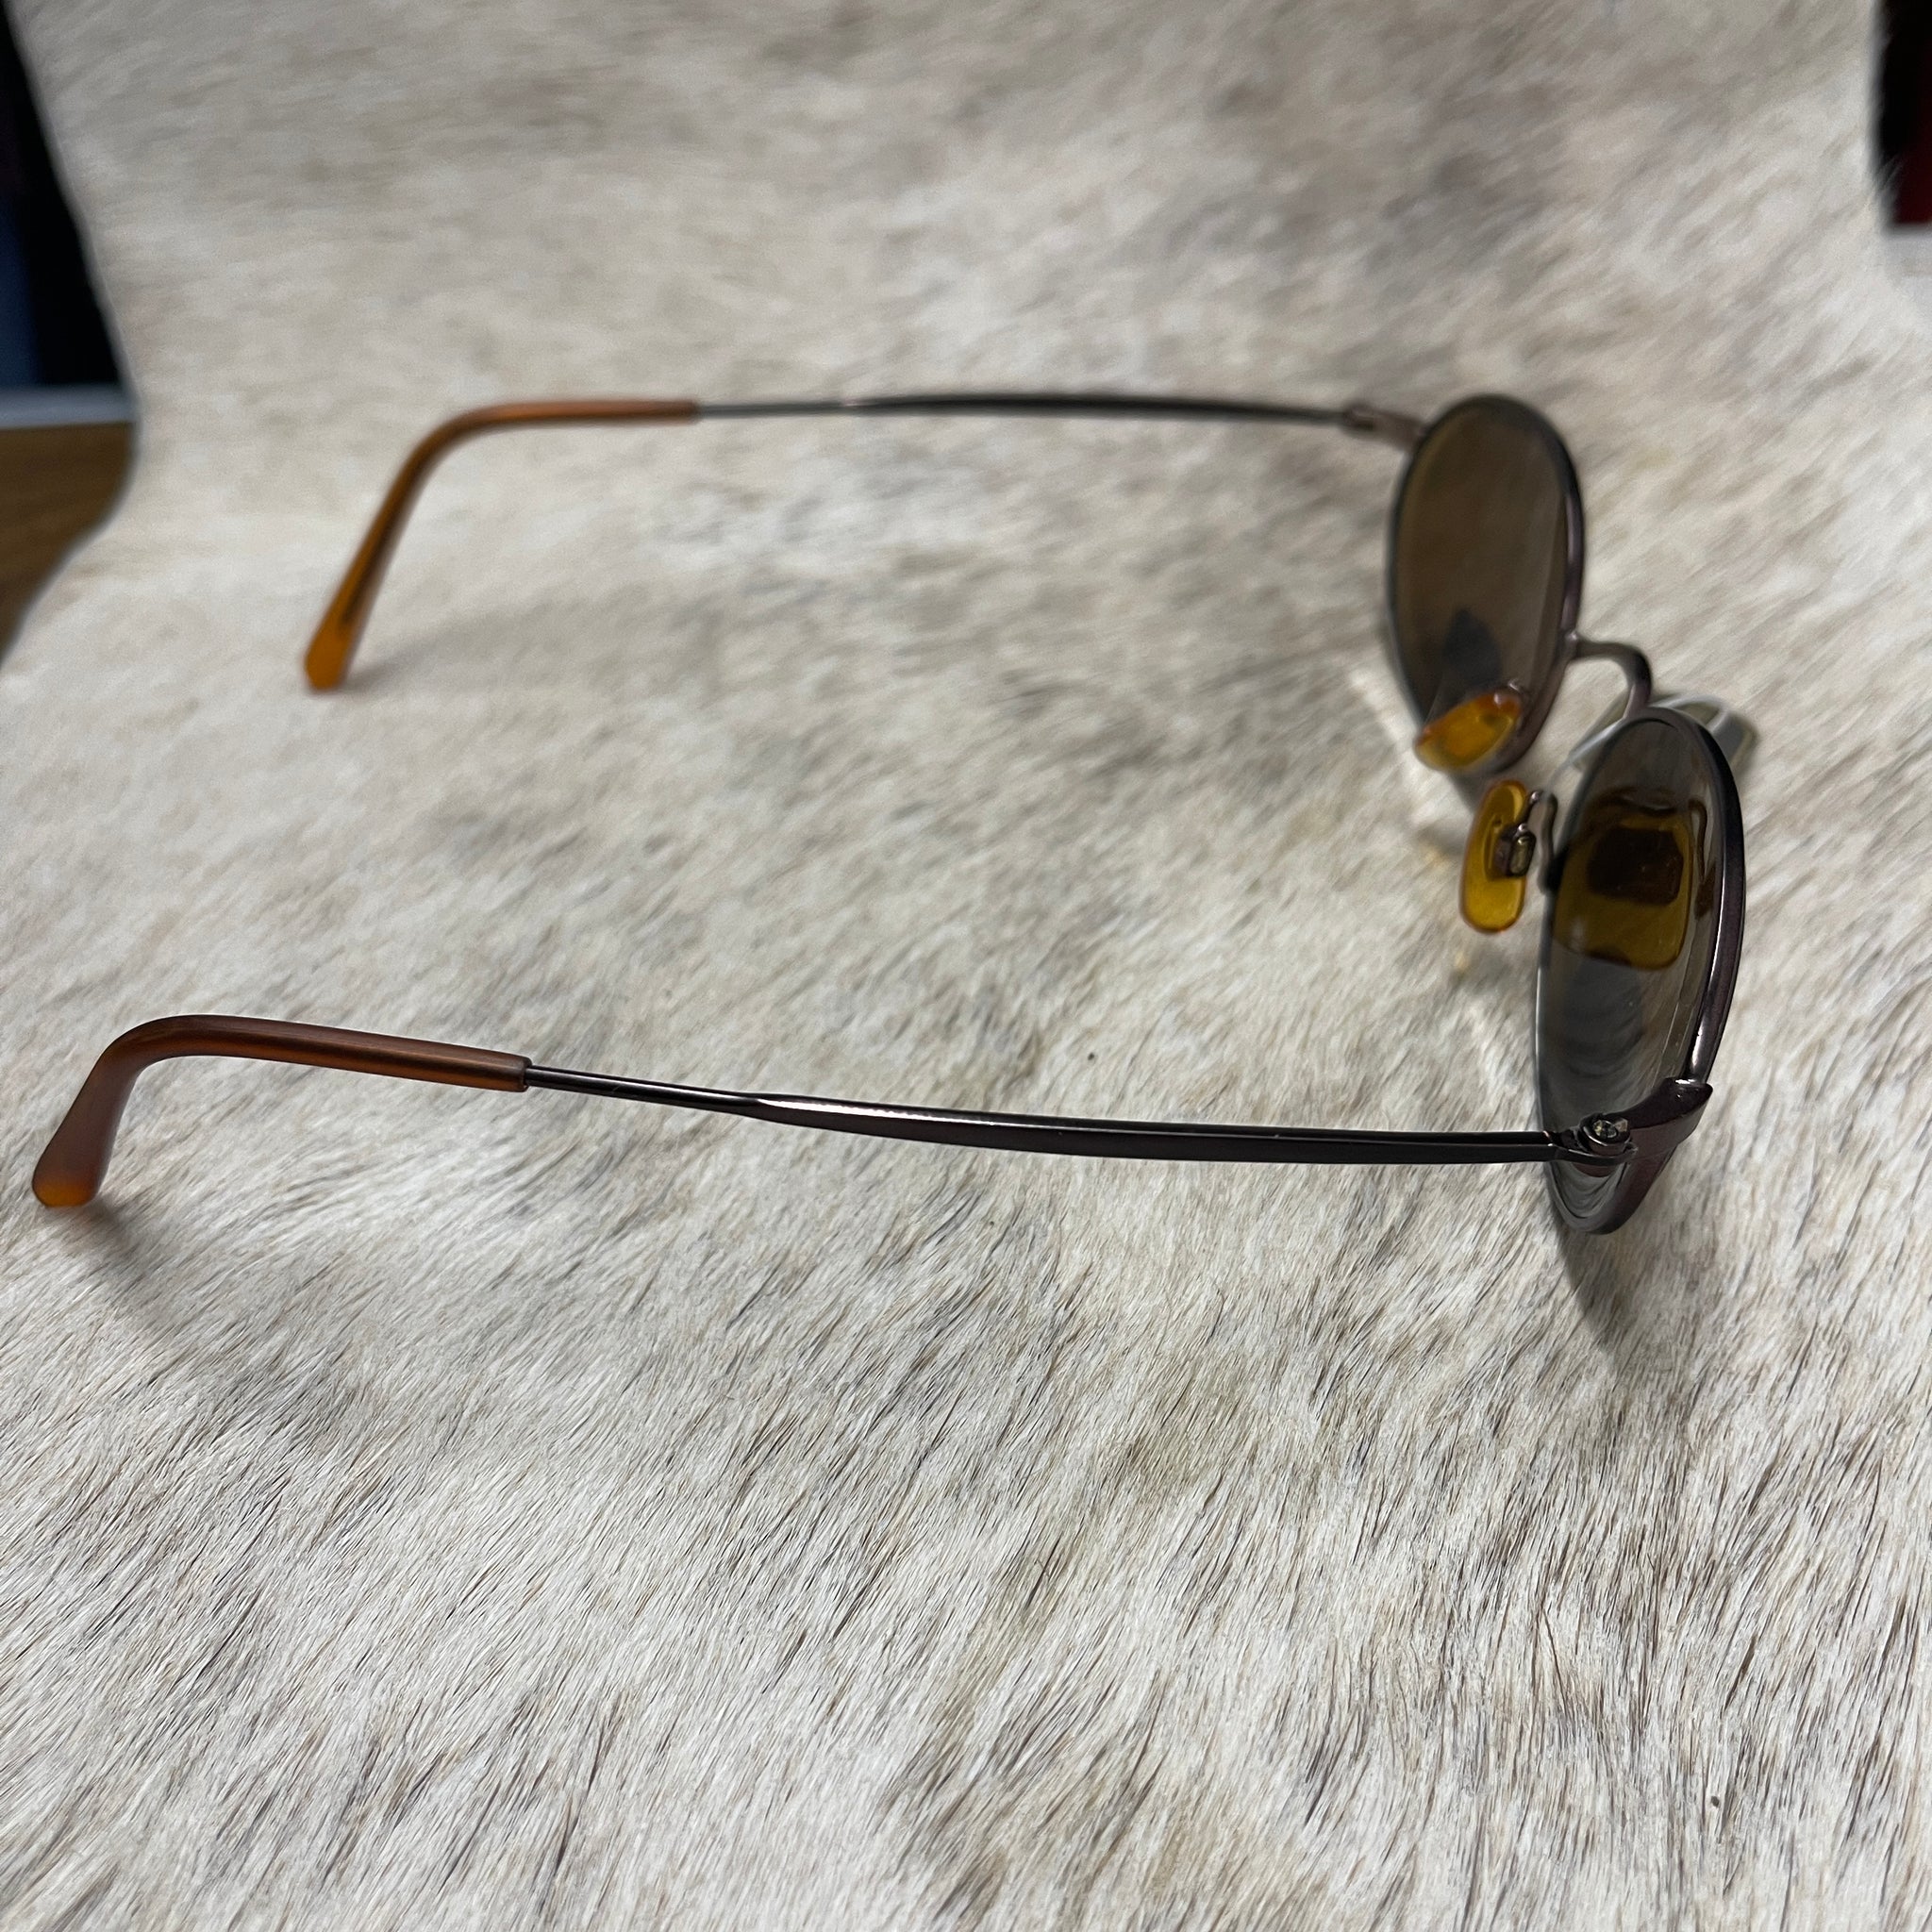 New Old Stock 90s sunglasses